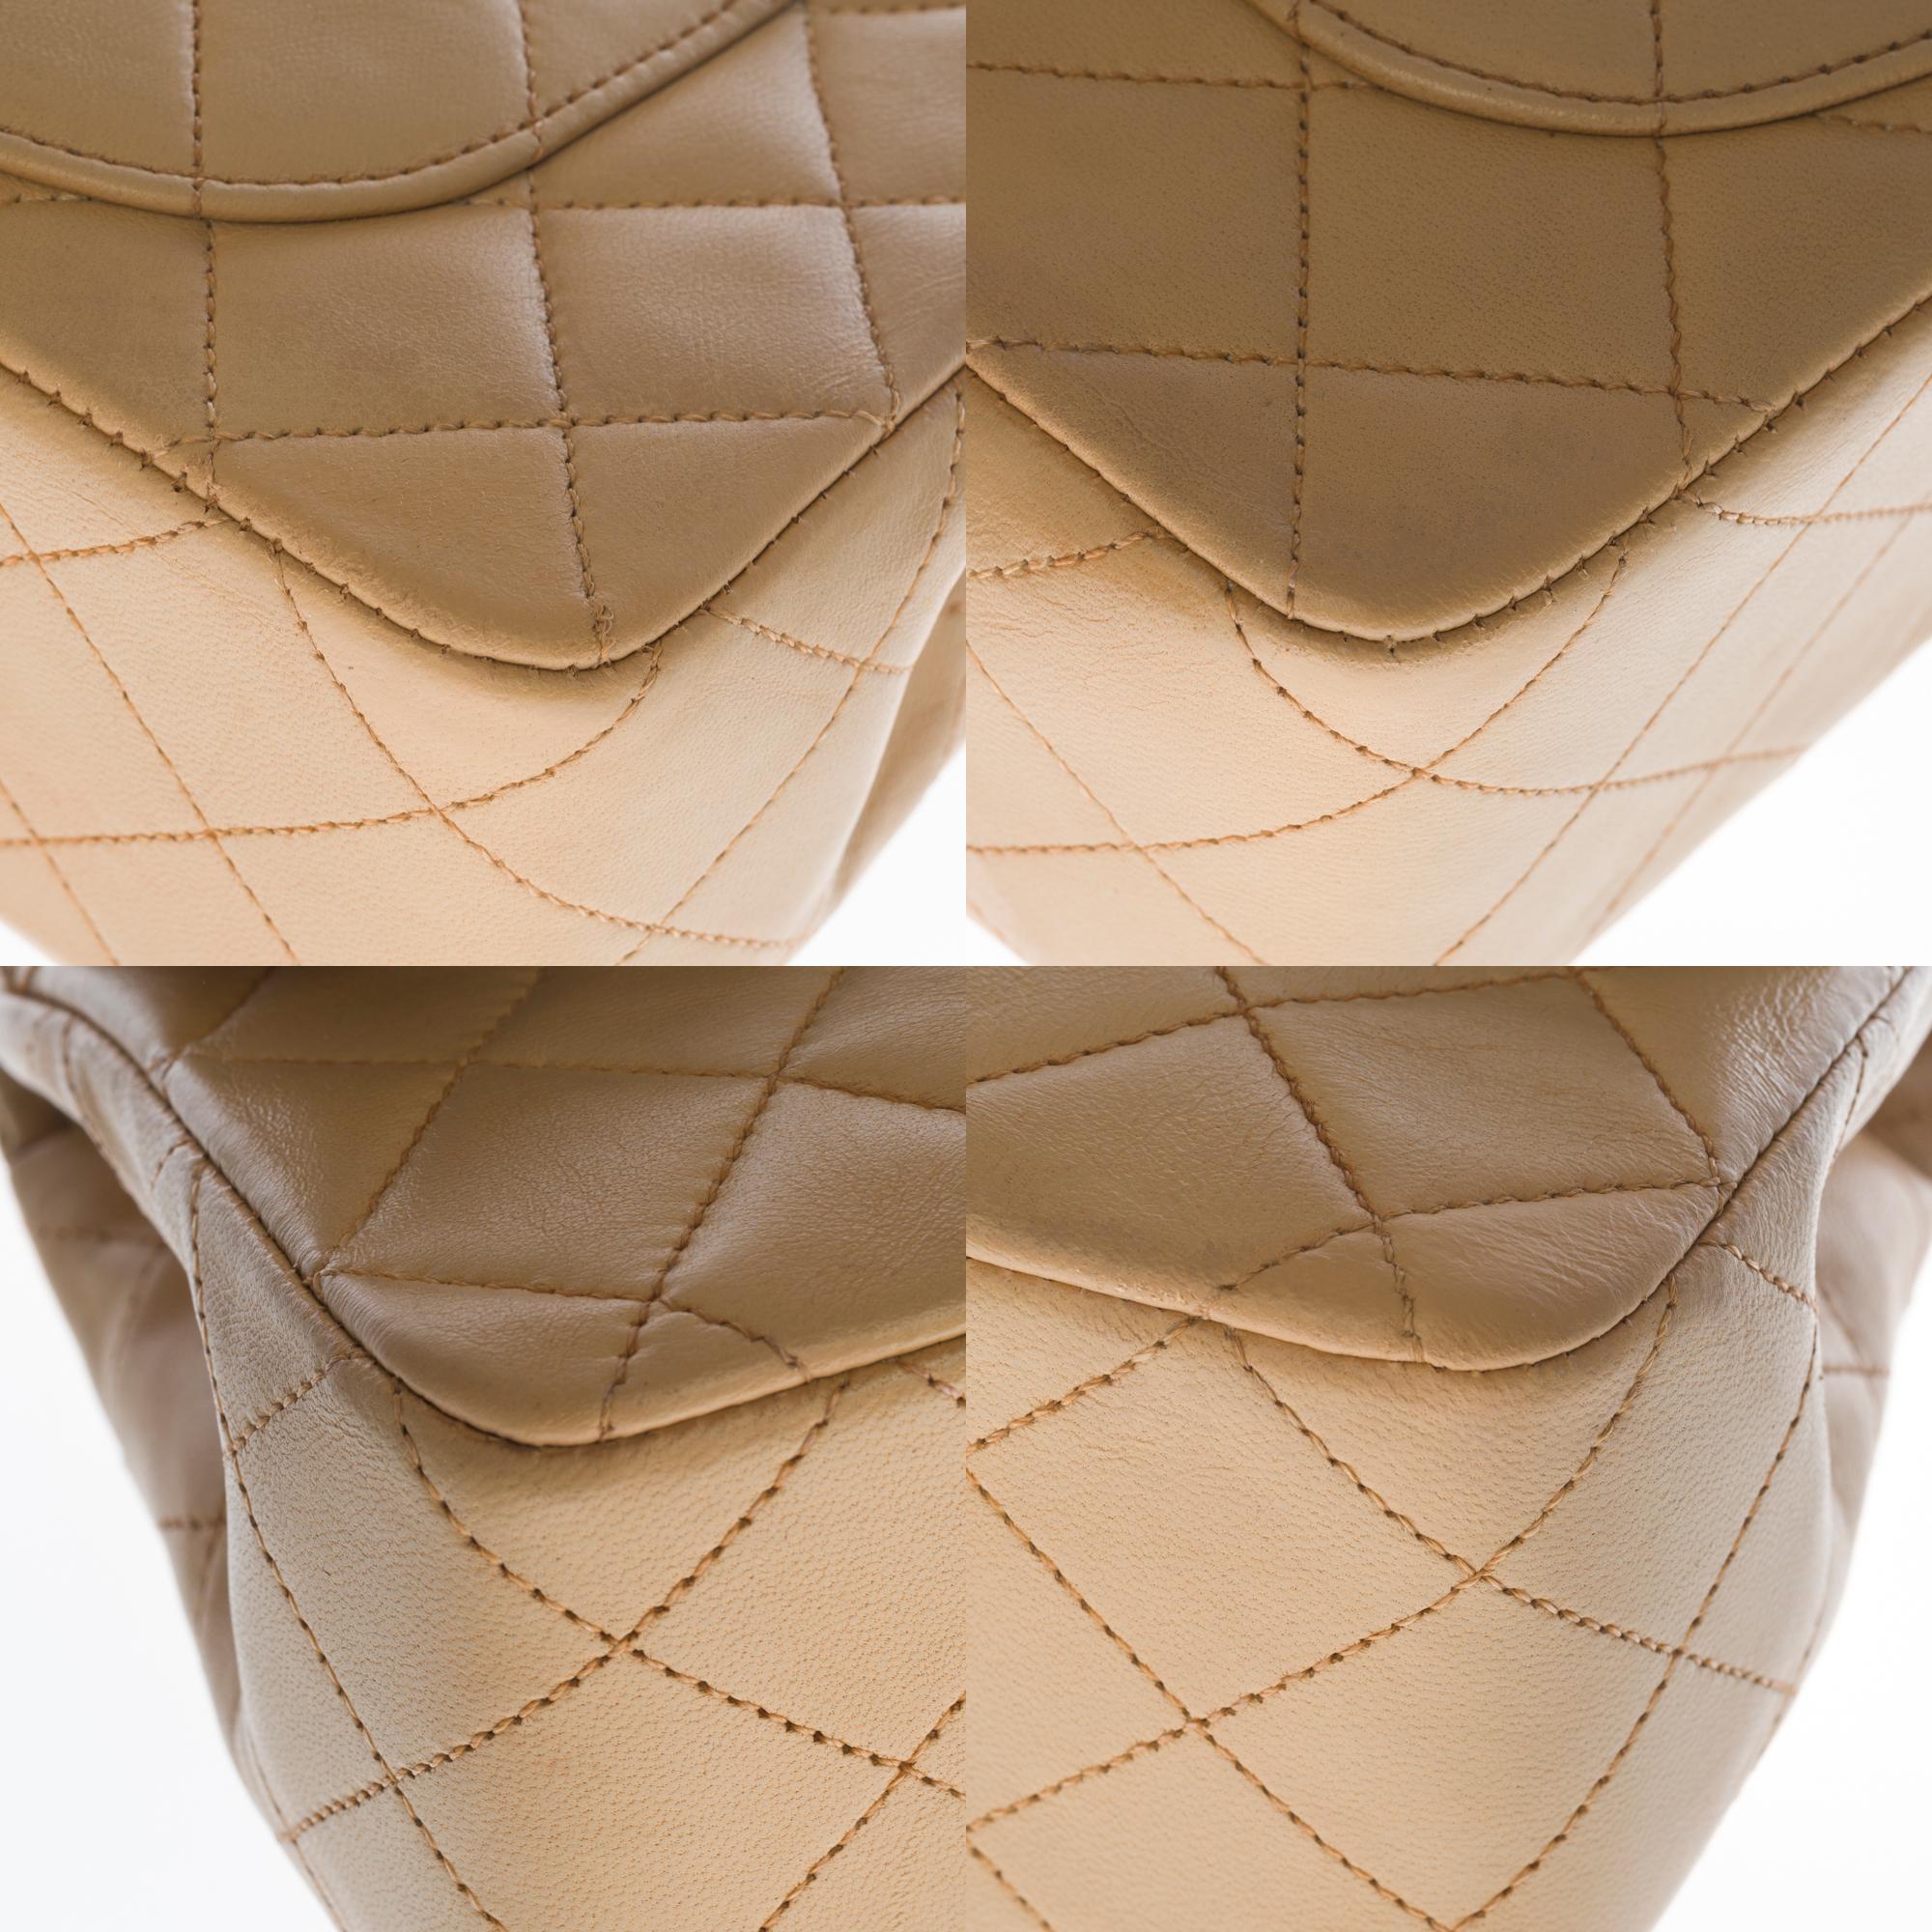 Chanel Timeless 23cm double flap Shoulder bag in Beige quilted lambskin, GHW 3